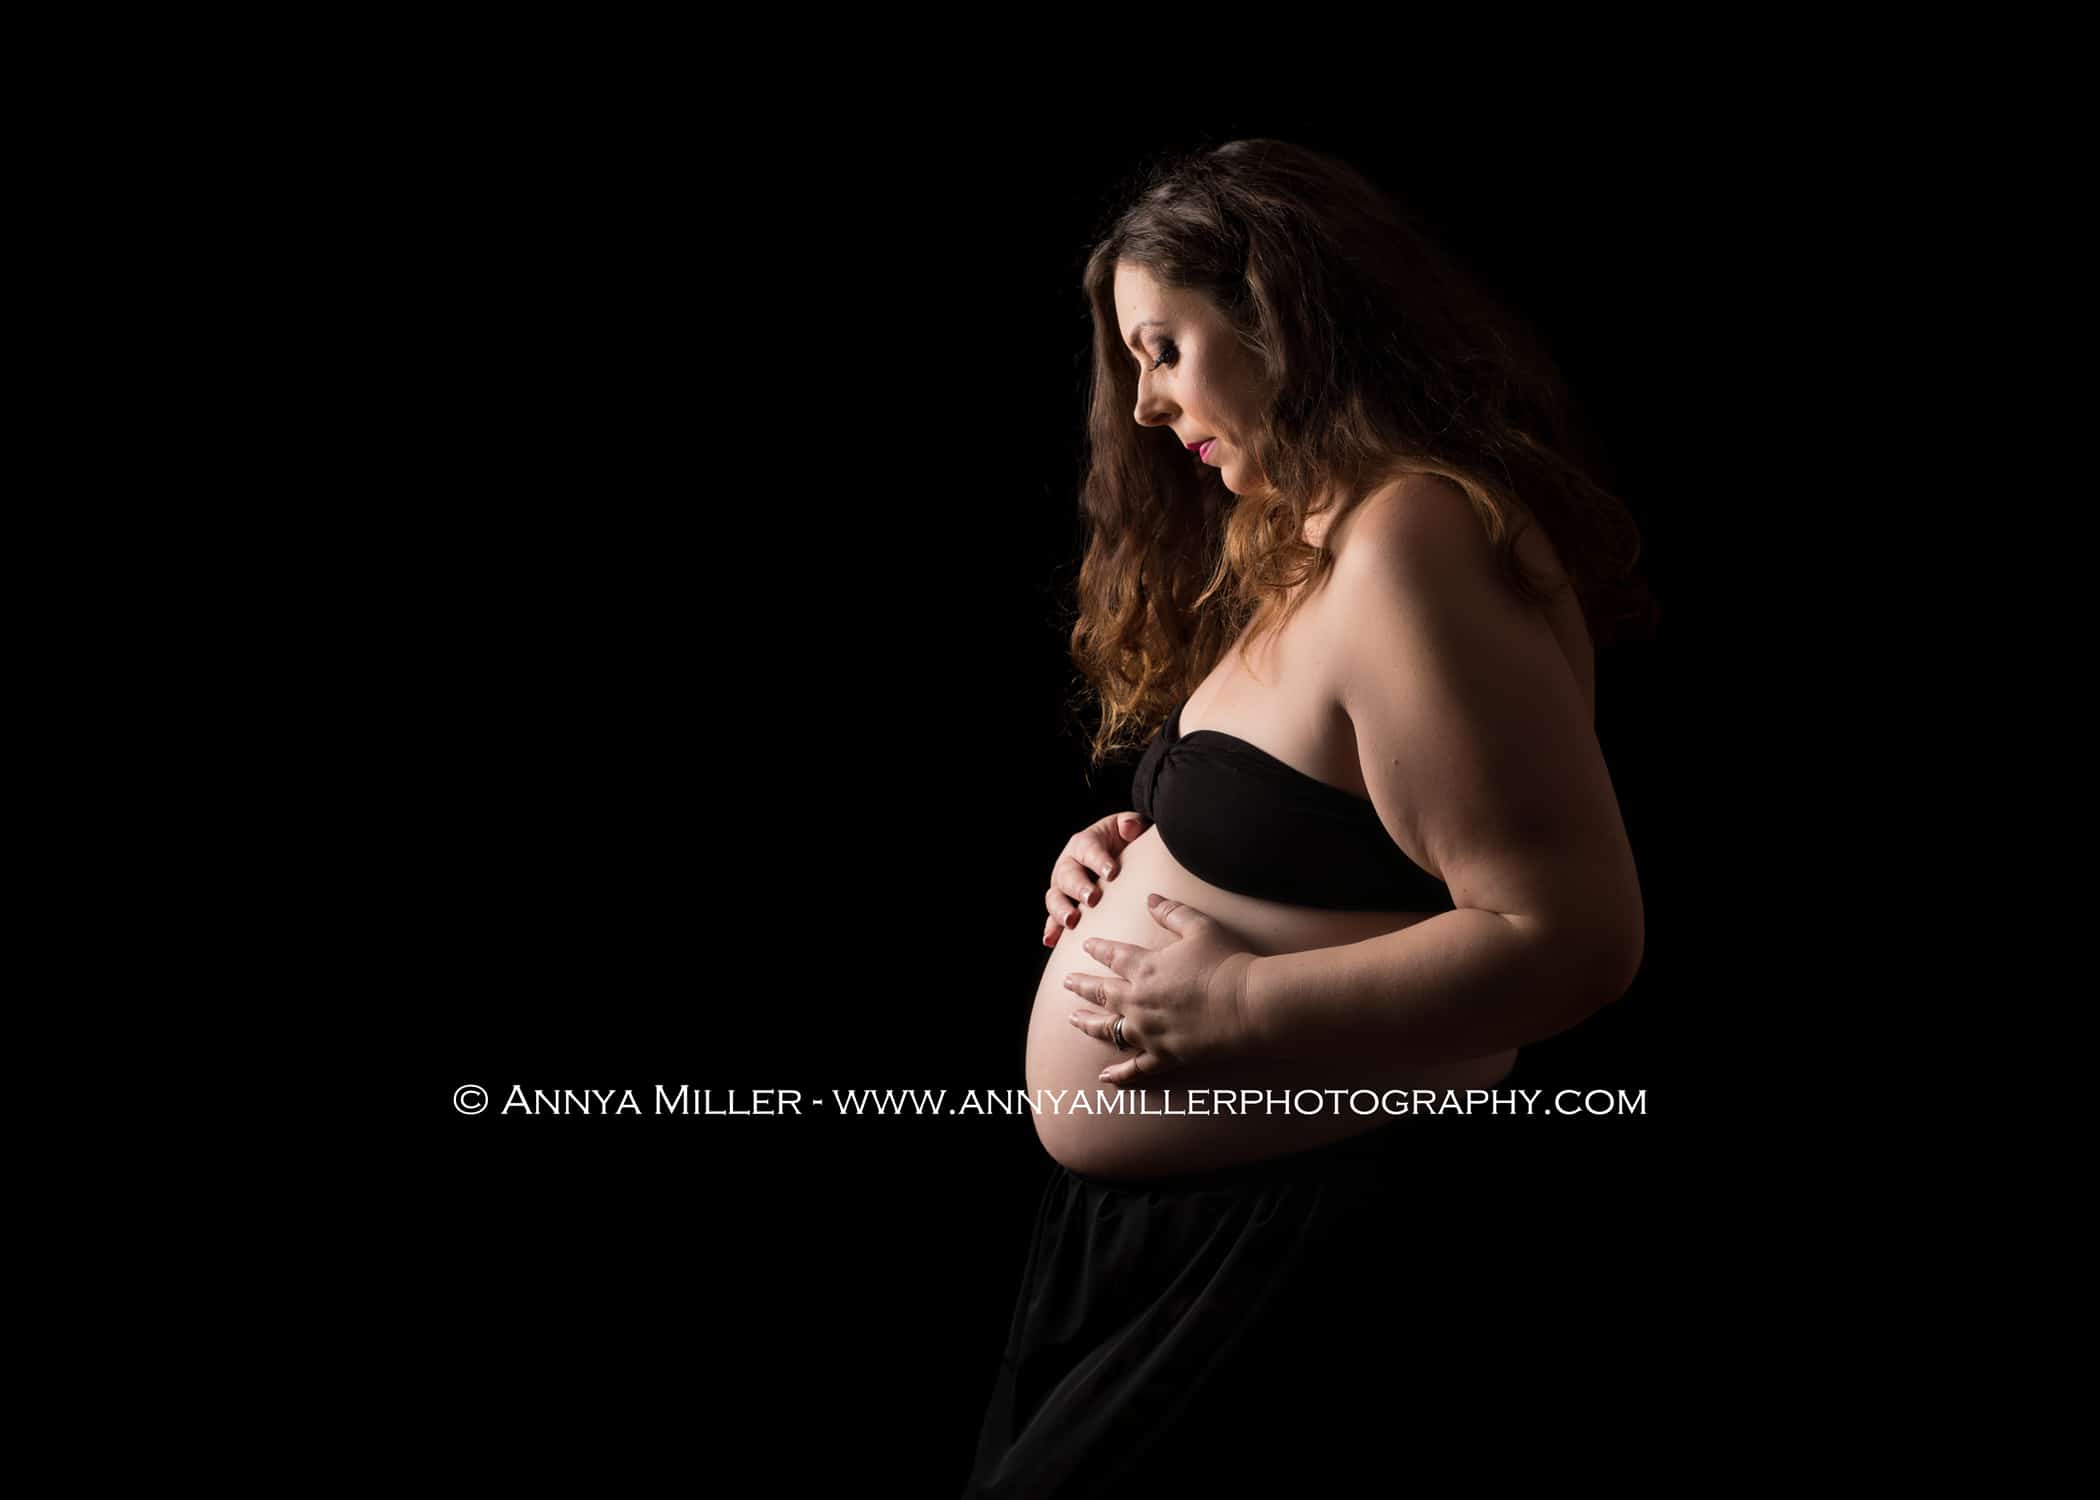 Pregnancy portraits by local maternity photographer Annya Miller of Pickering.